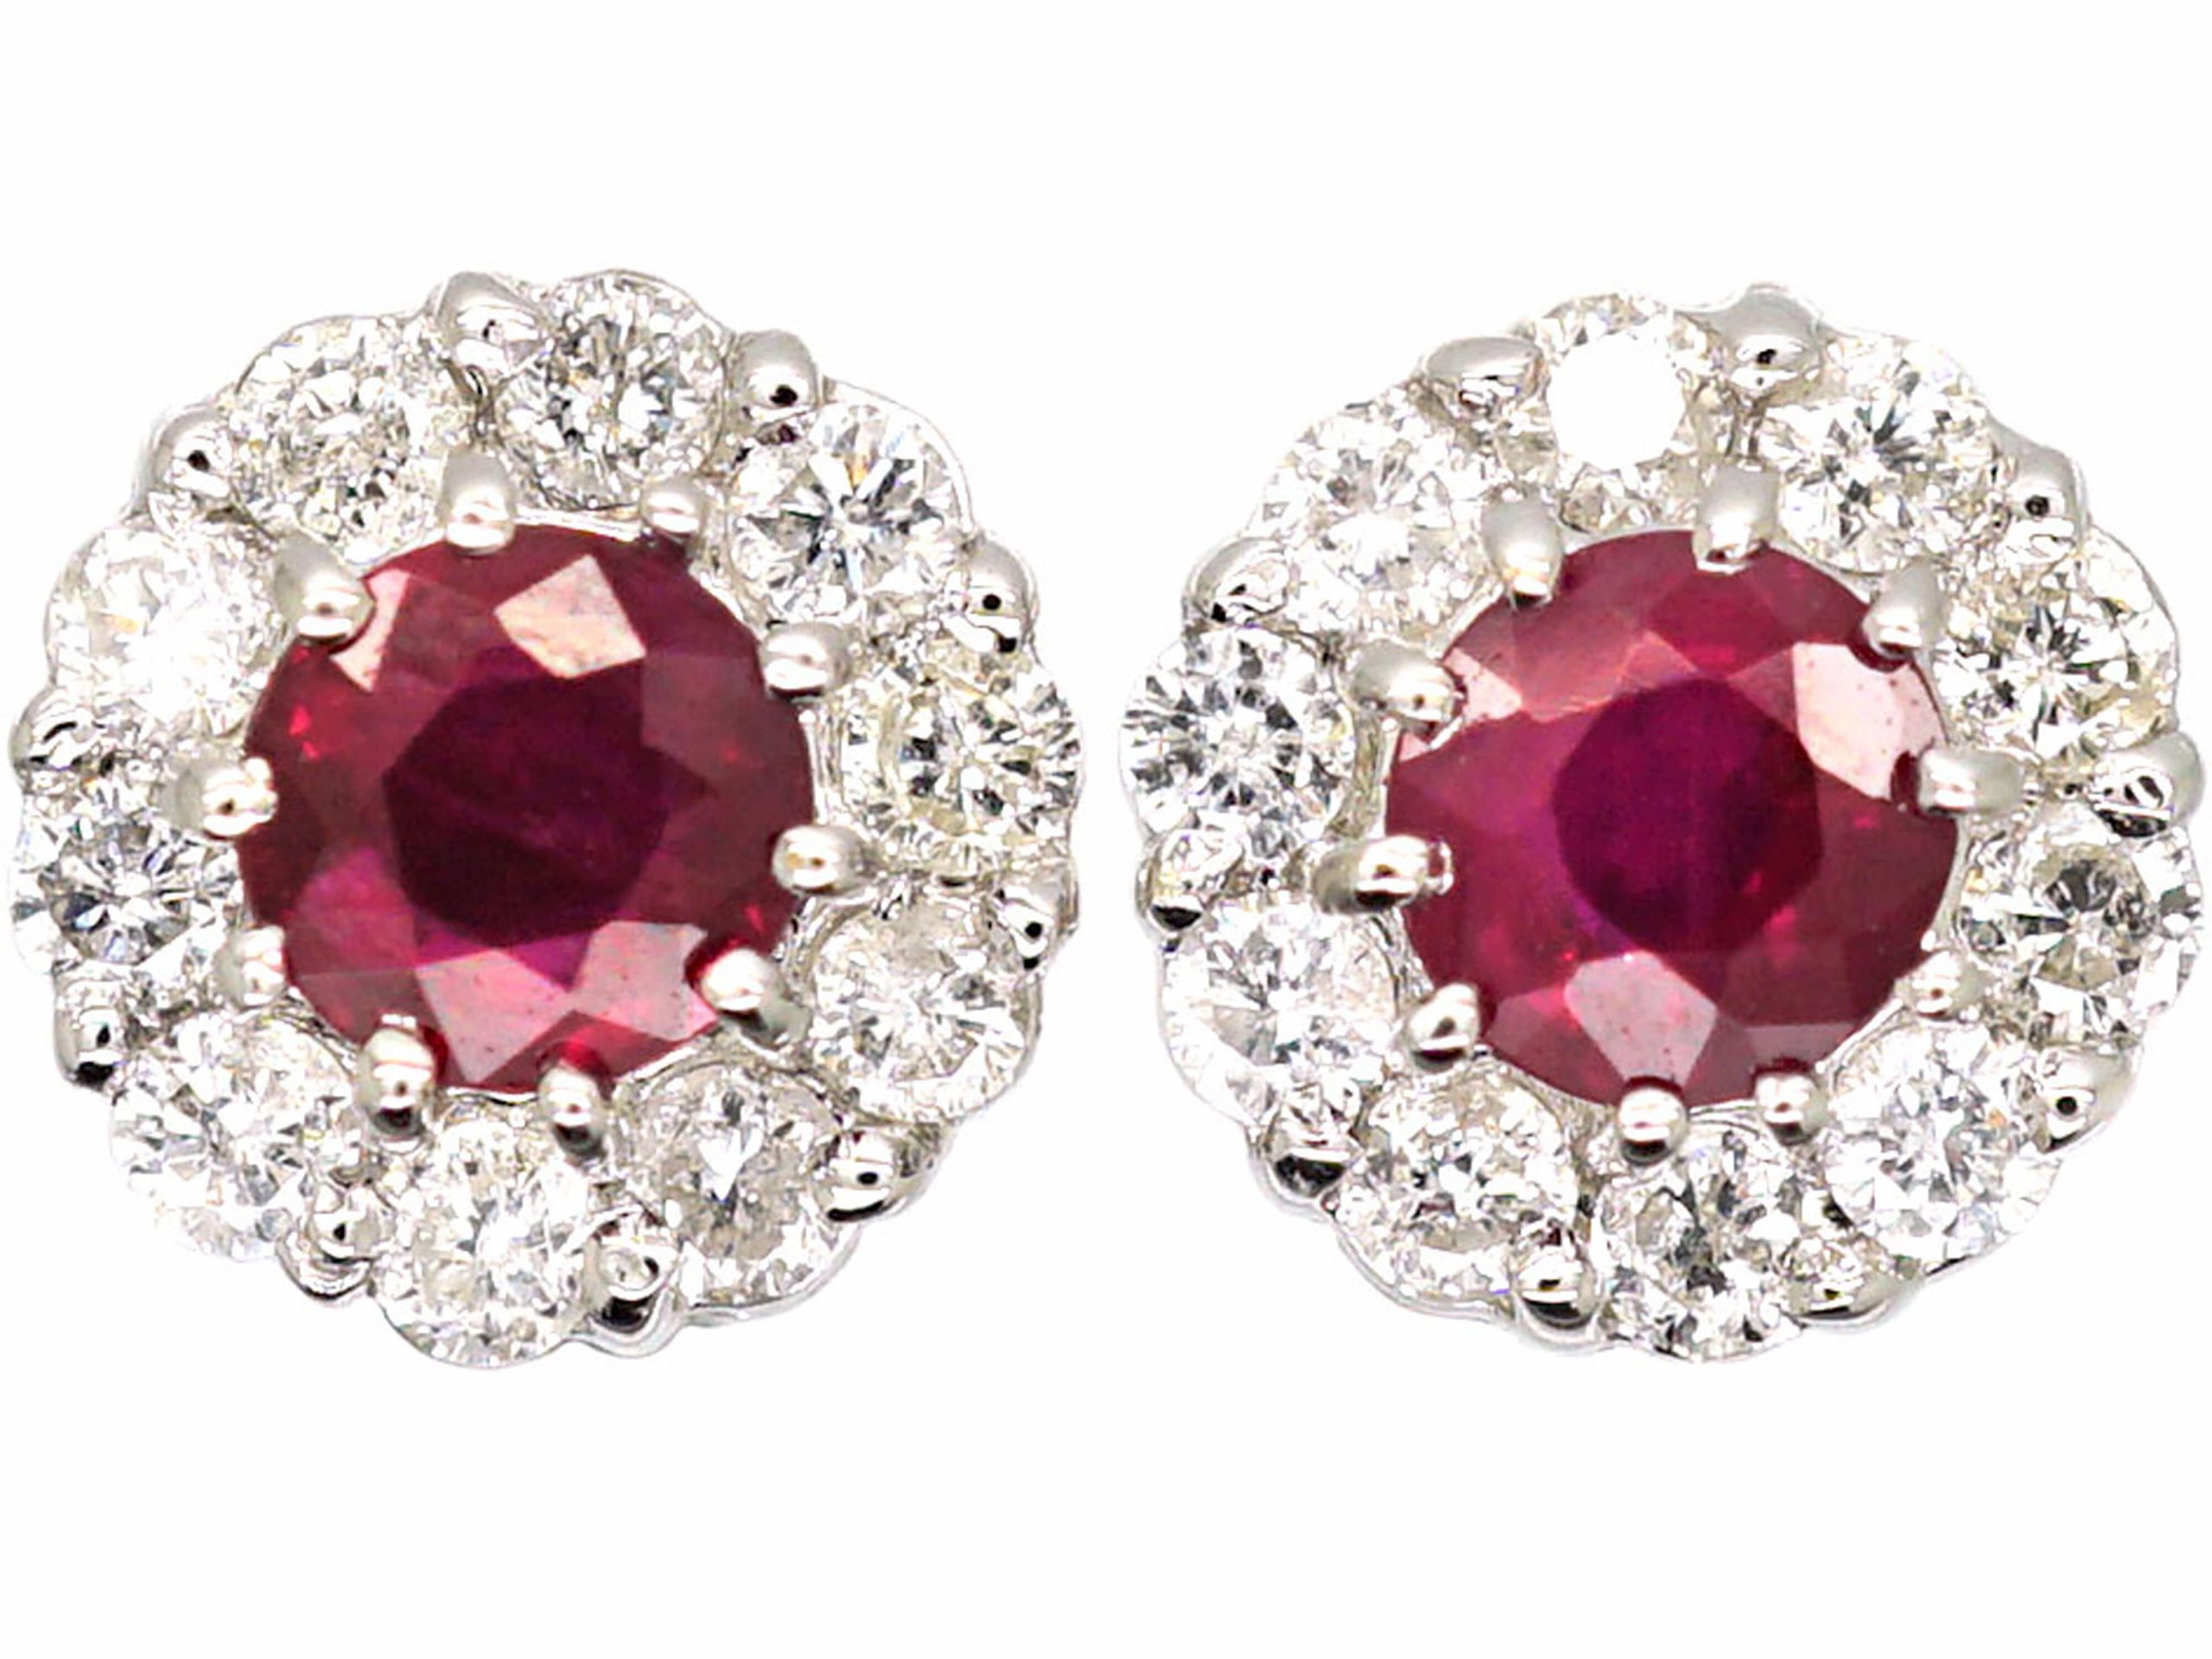 18ct White Gold, Ruby & Diamond Cluster Earrings (925S) | The Antique ...